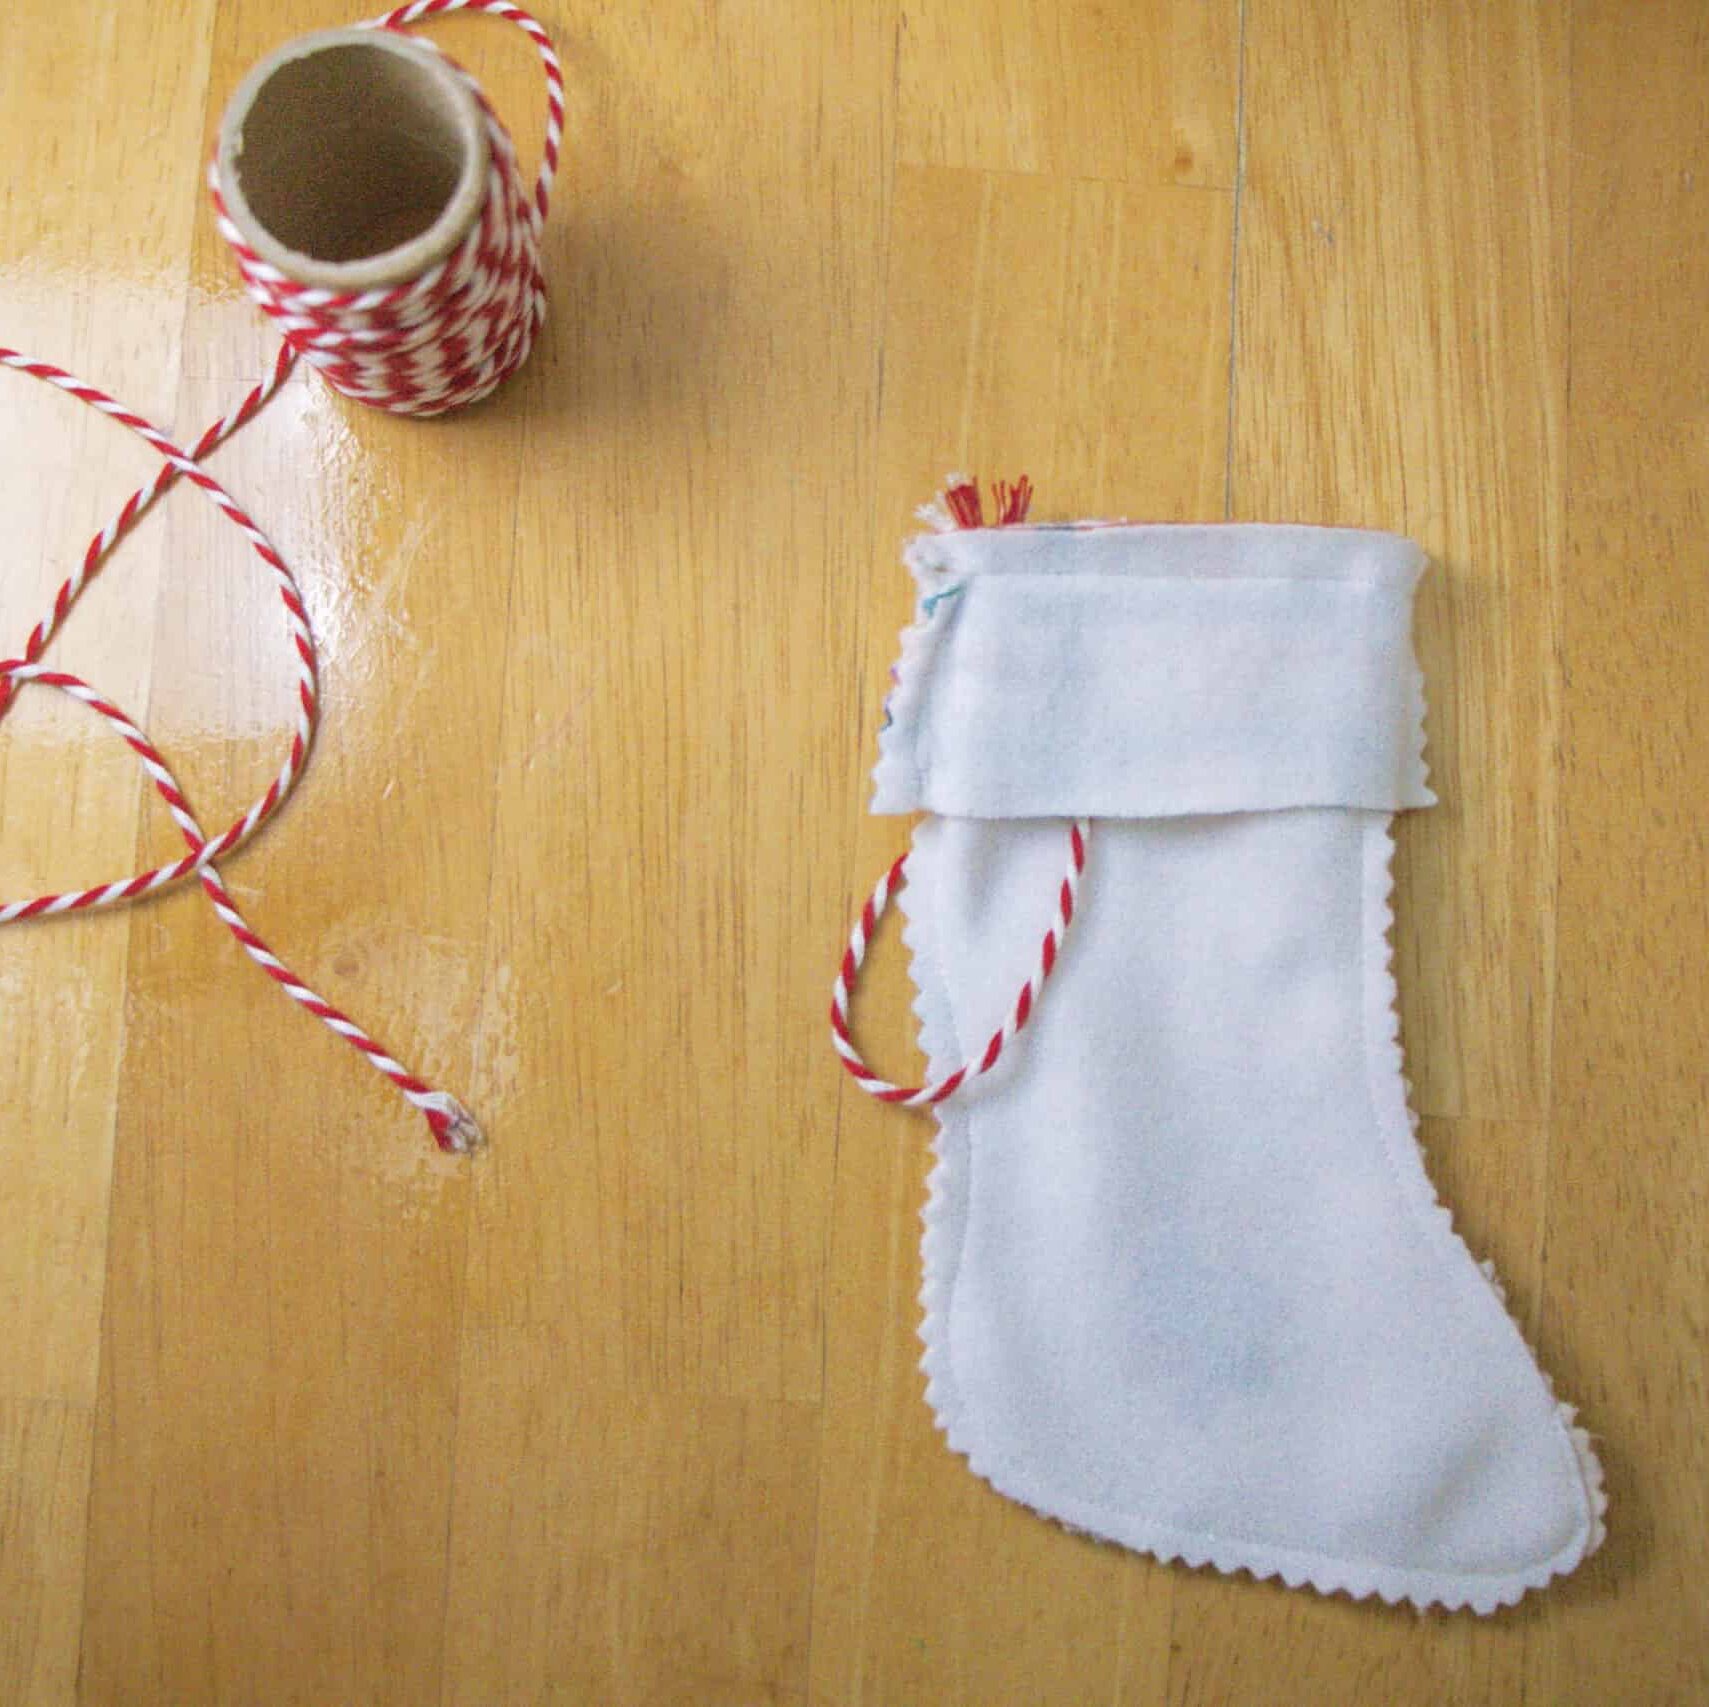 Image of the stocking after sewing around the top edge. It is still turned inside out with the white “wrong” sides of the fabric showing. The top seam has been sewn with a light blue thread. 